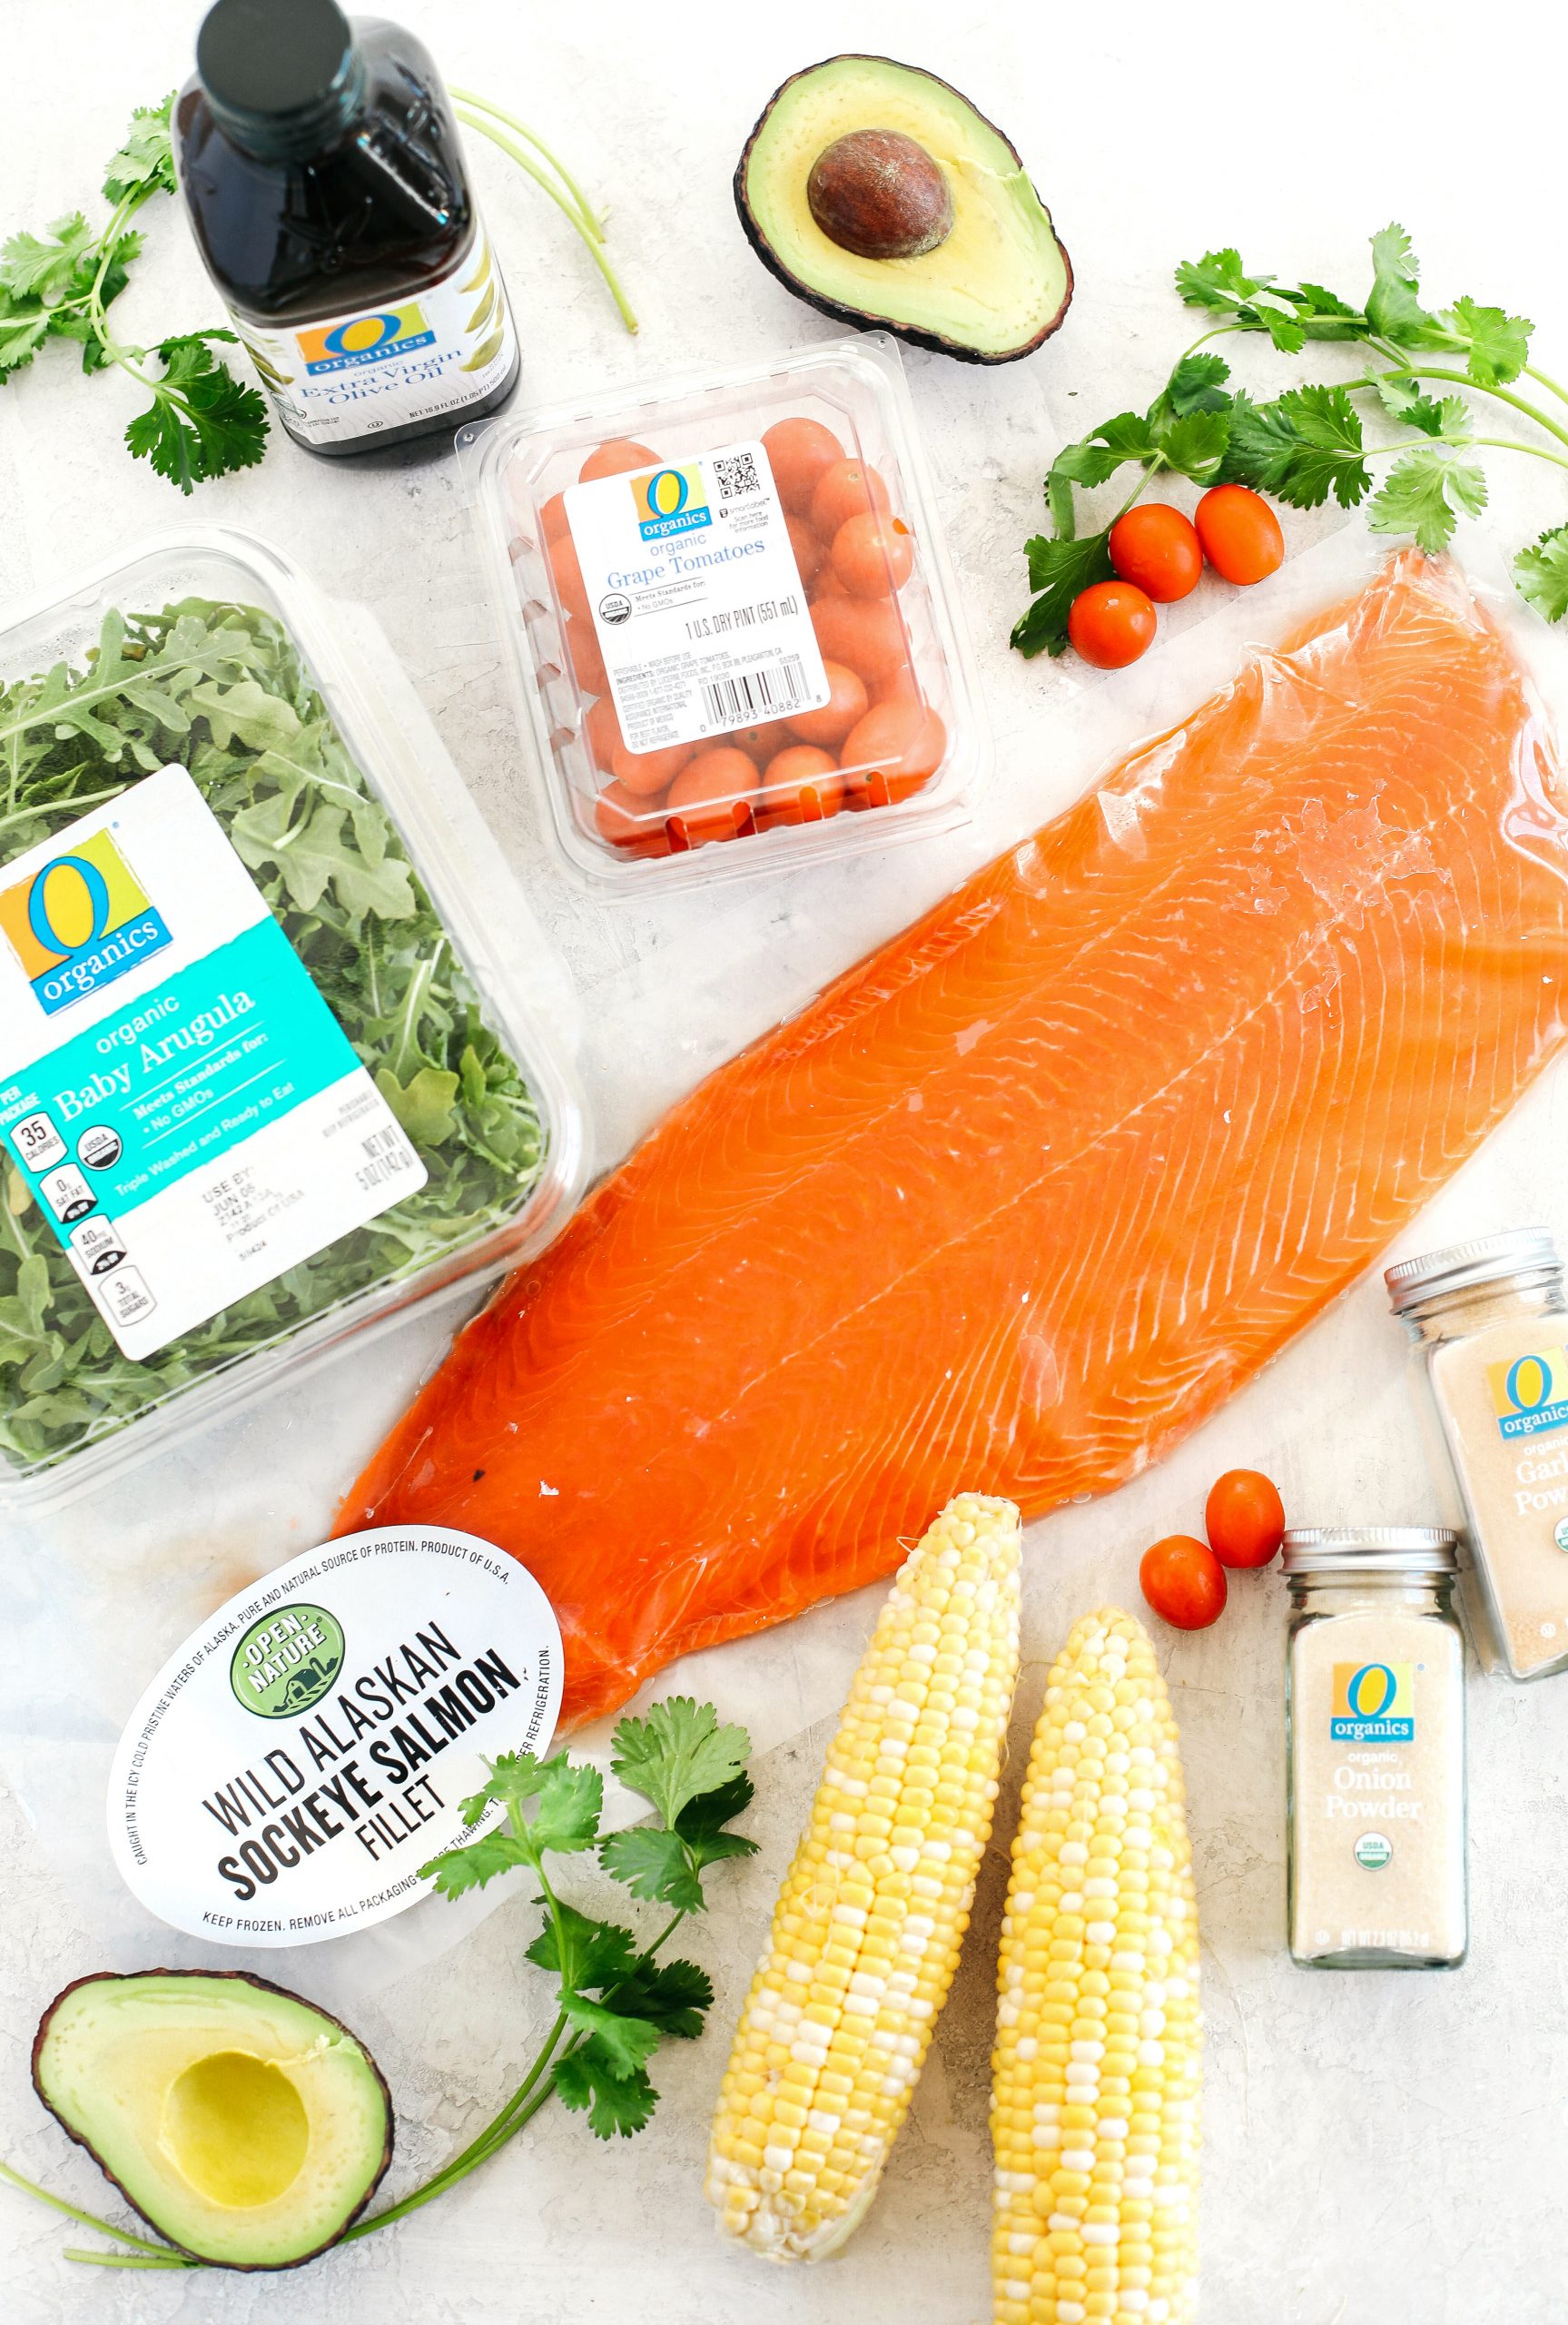 Chili-rubbed salmon with grilled corn, fresh tomatoes and sliced avocado all tossed together with a cilantro-lime dressing makes the perfect summer salad!